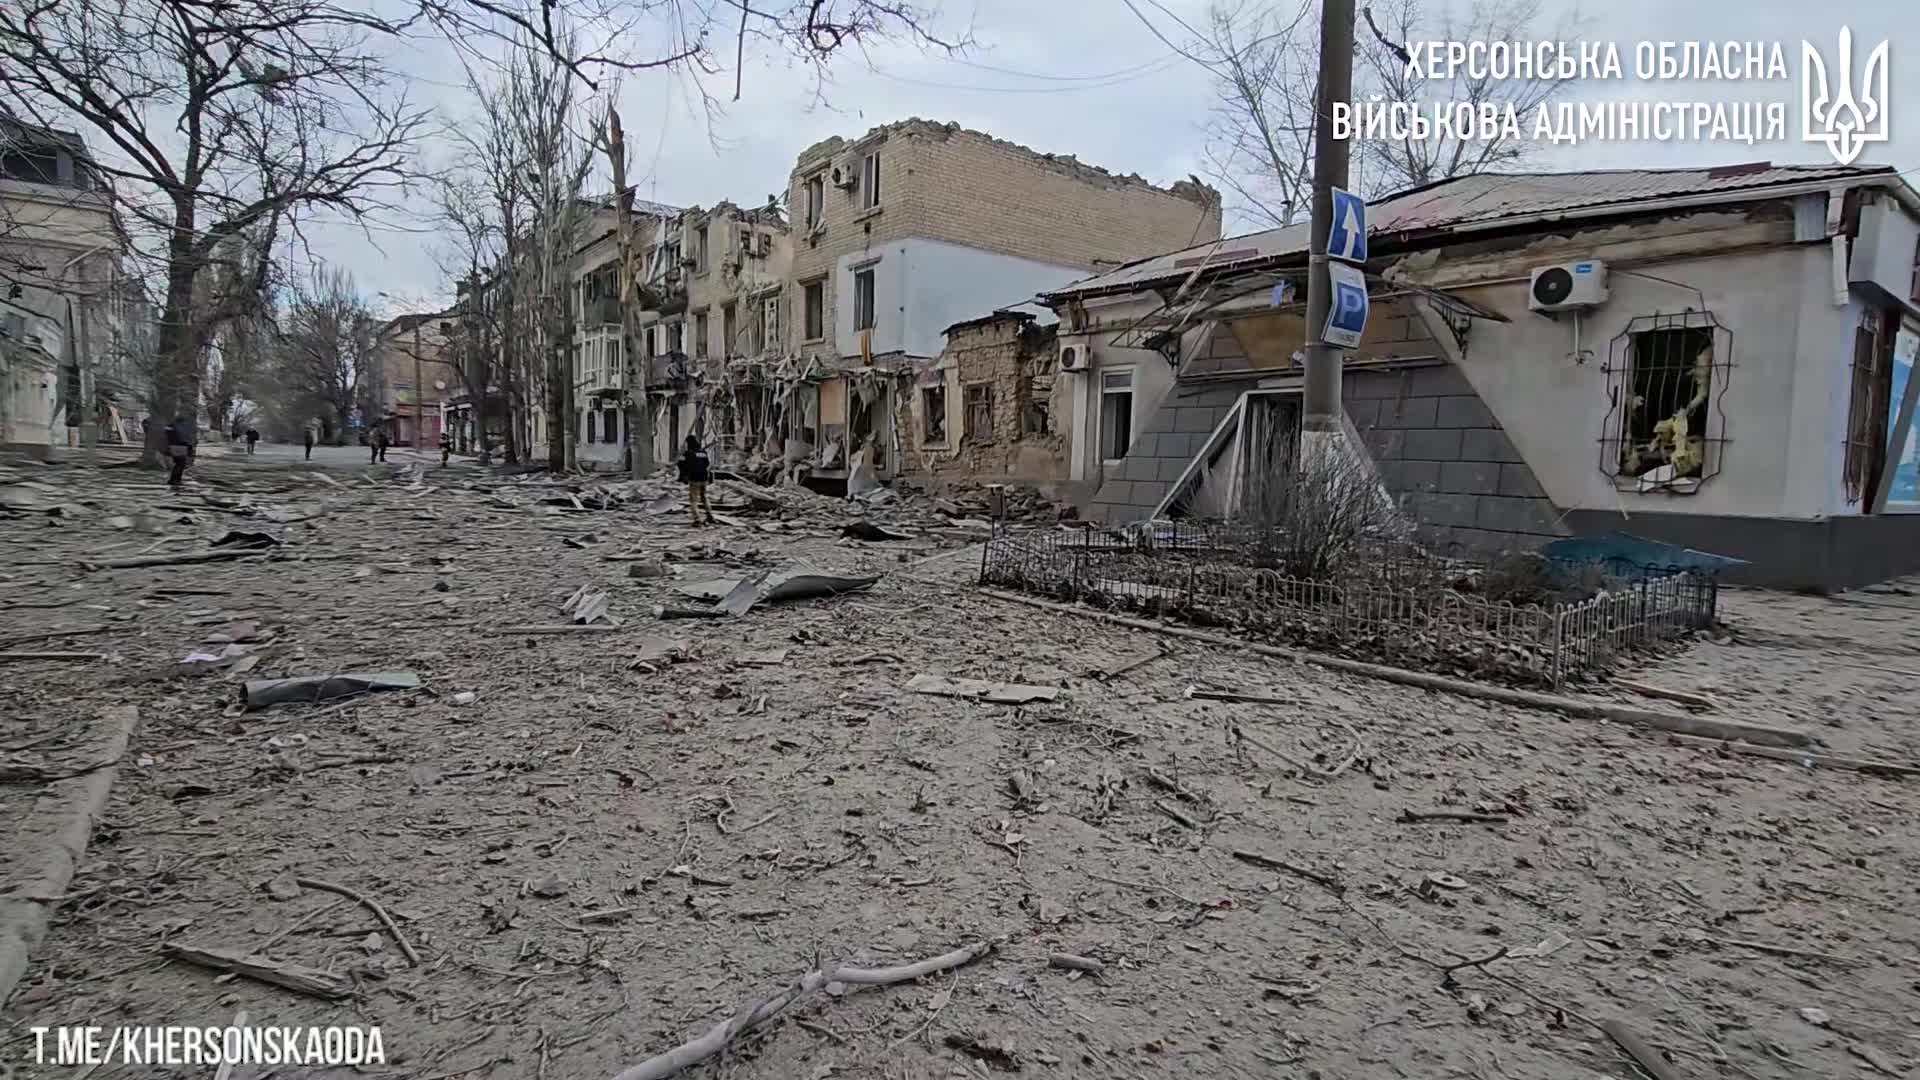 2 wounded as result of an airstrike in Kherson